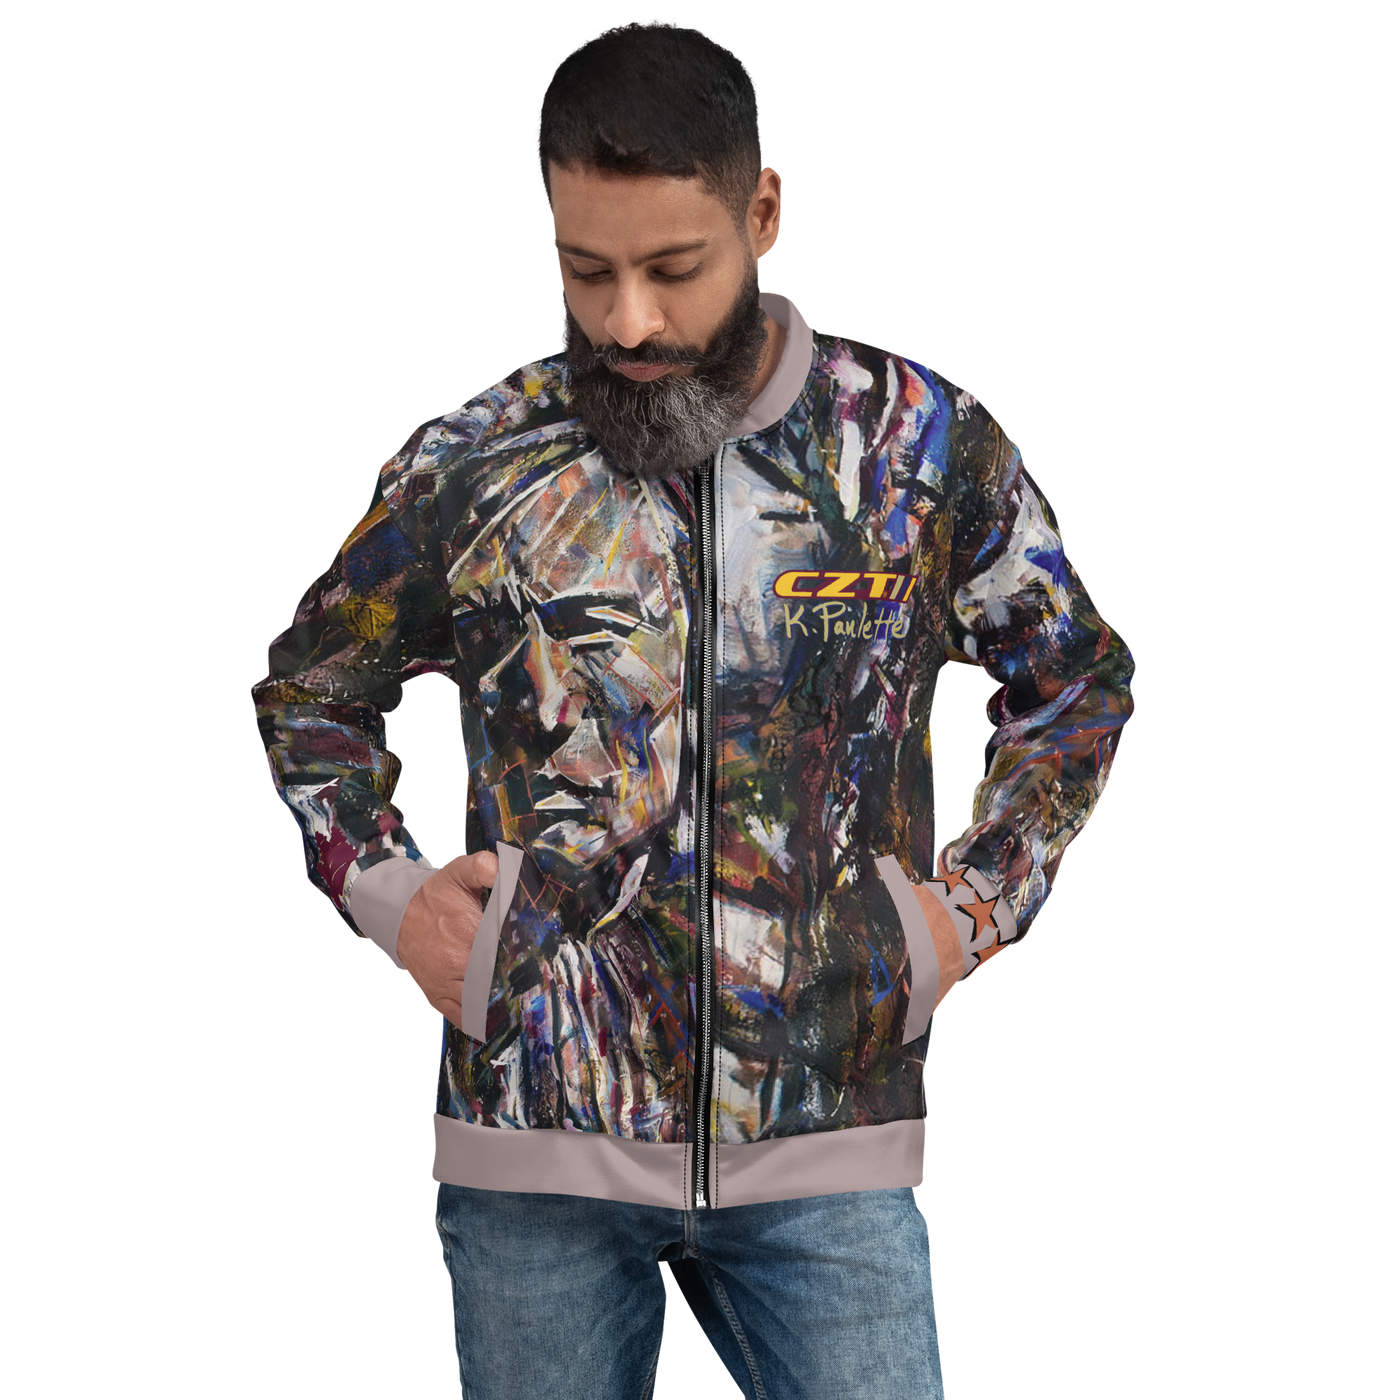 CZT X KP - VISIONS Native American Indian - Bomber Jacket (Unisex)